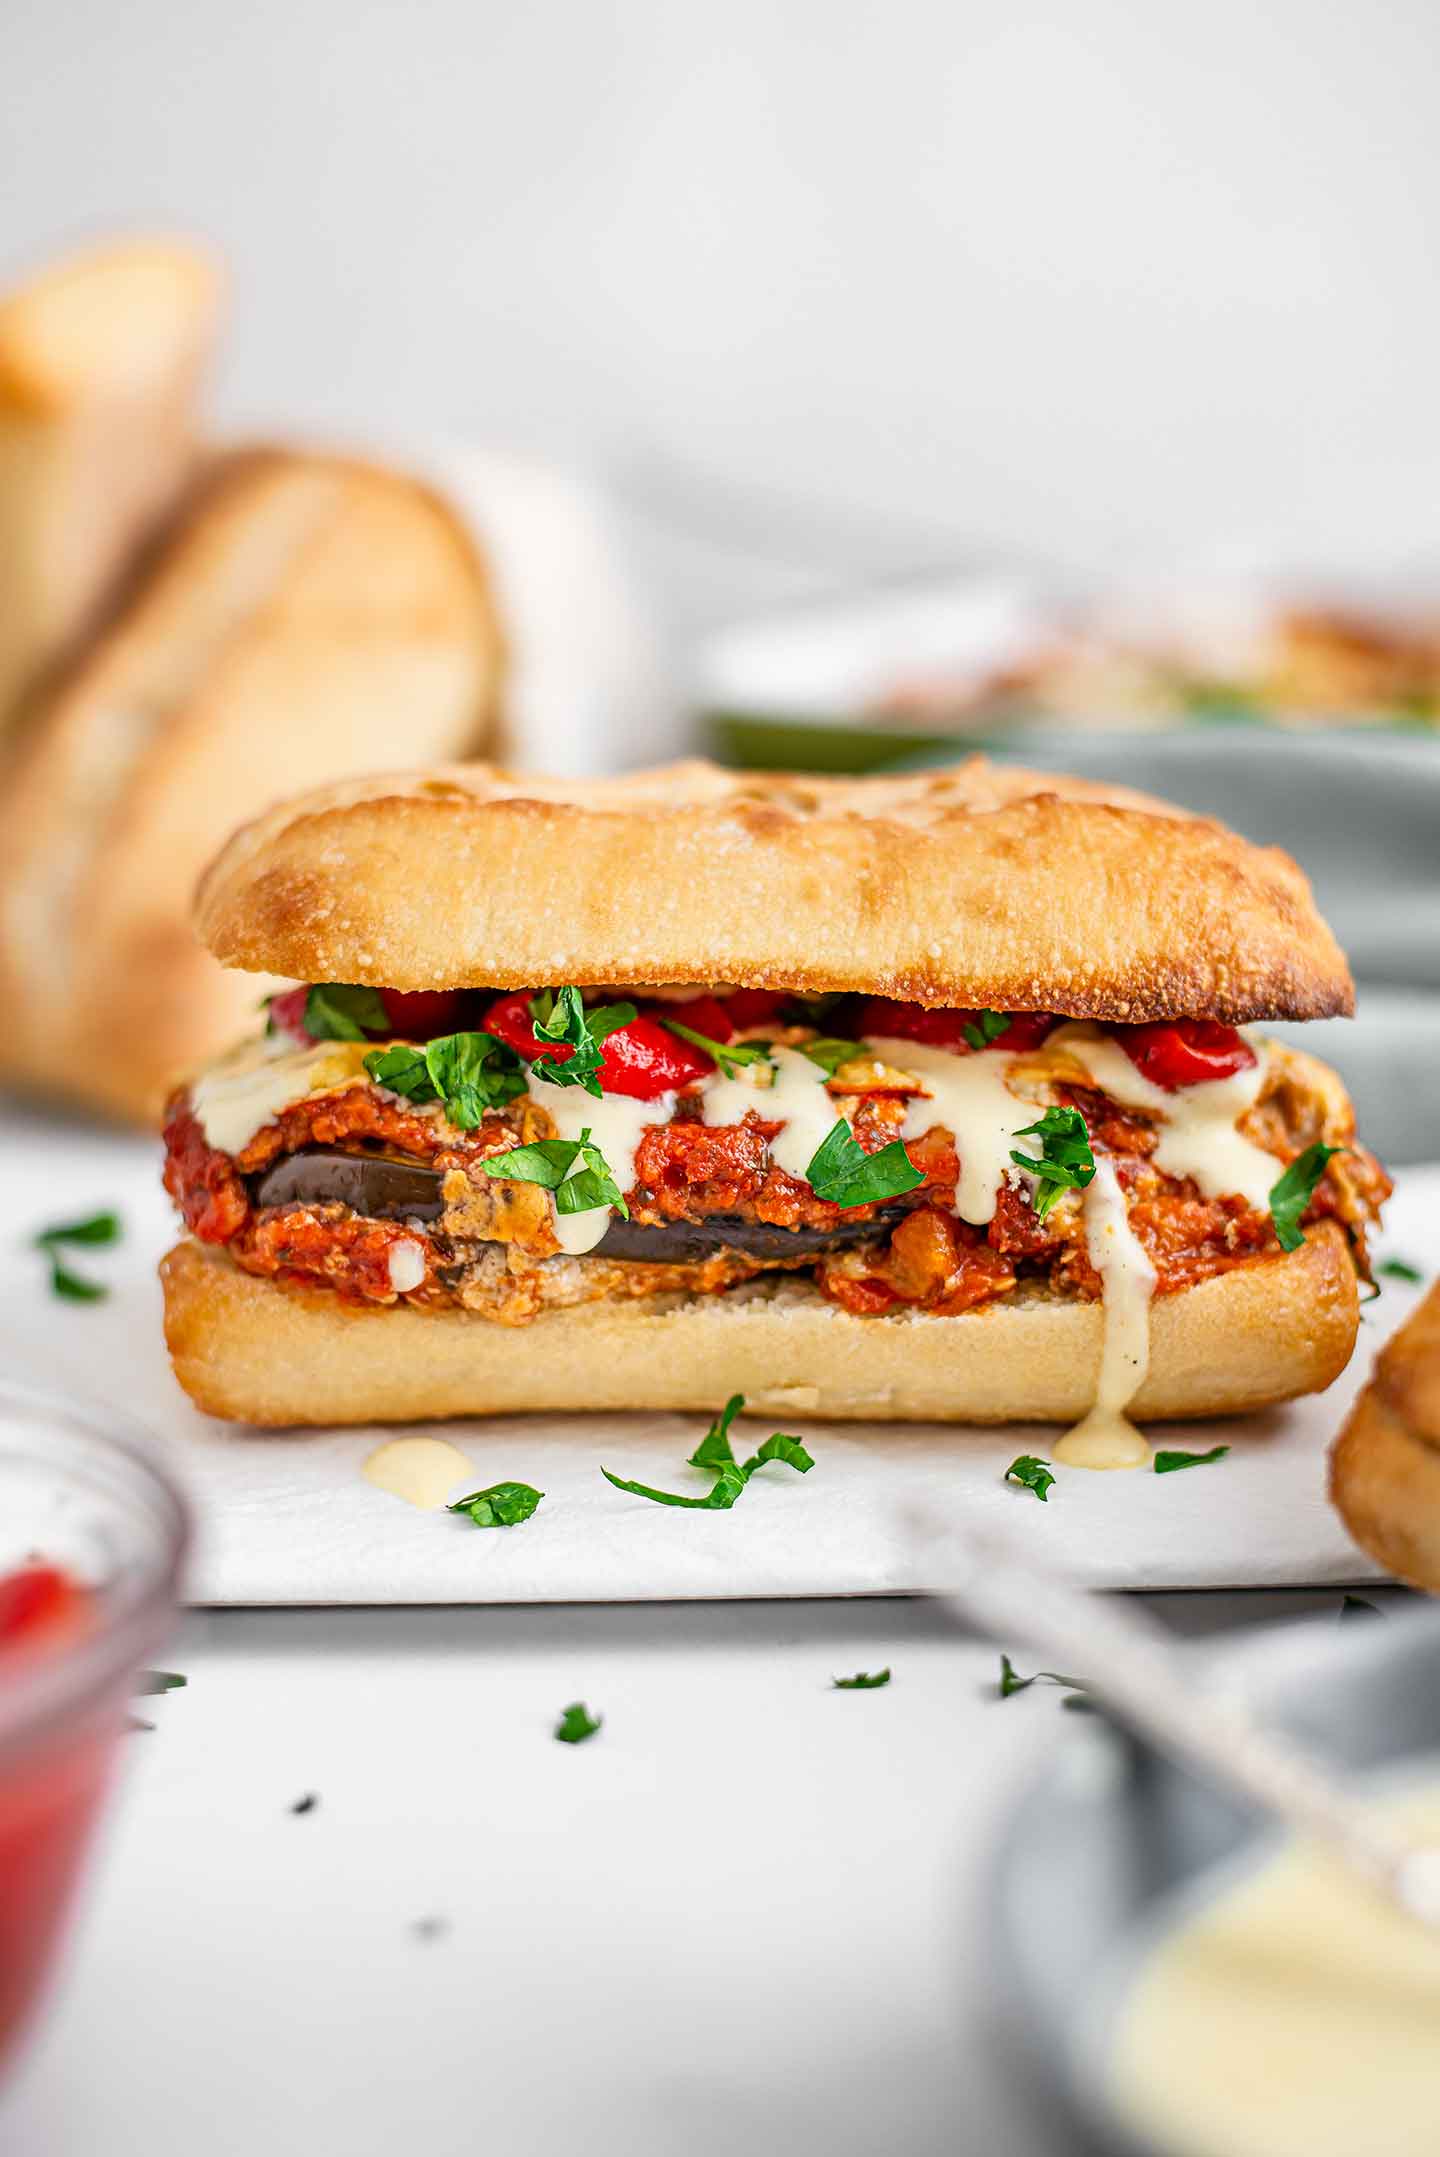 A finished eggplant parmesan sandwich sits on a white tray with other buns, more eggplant, and more toppings around.